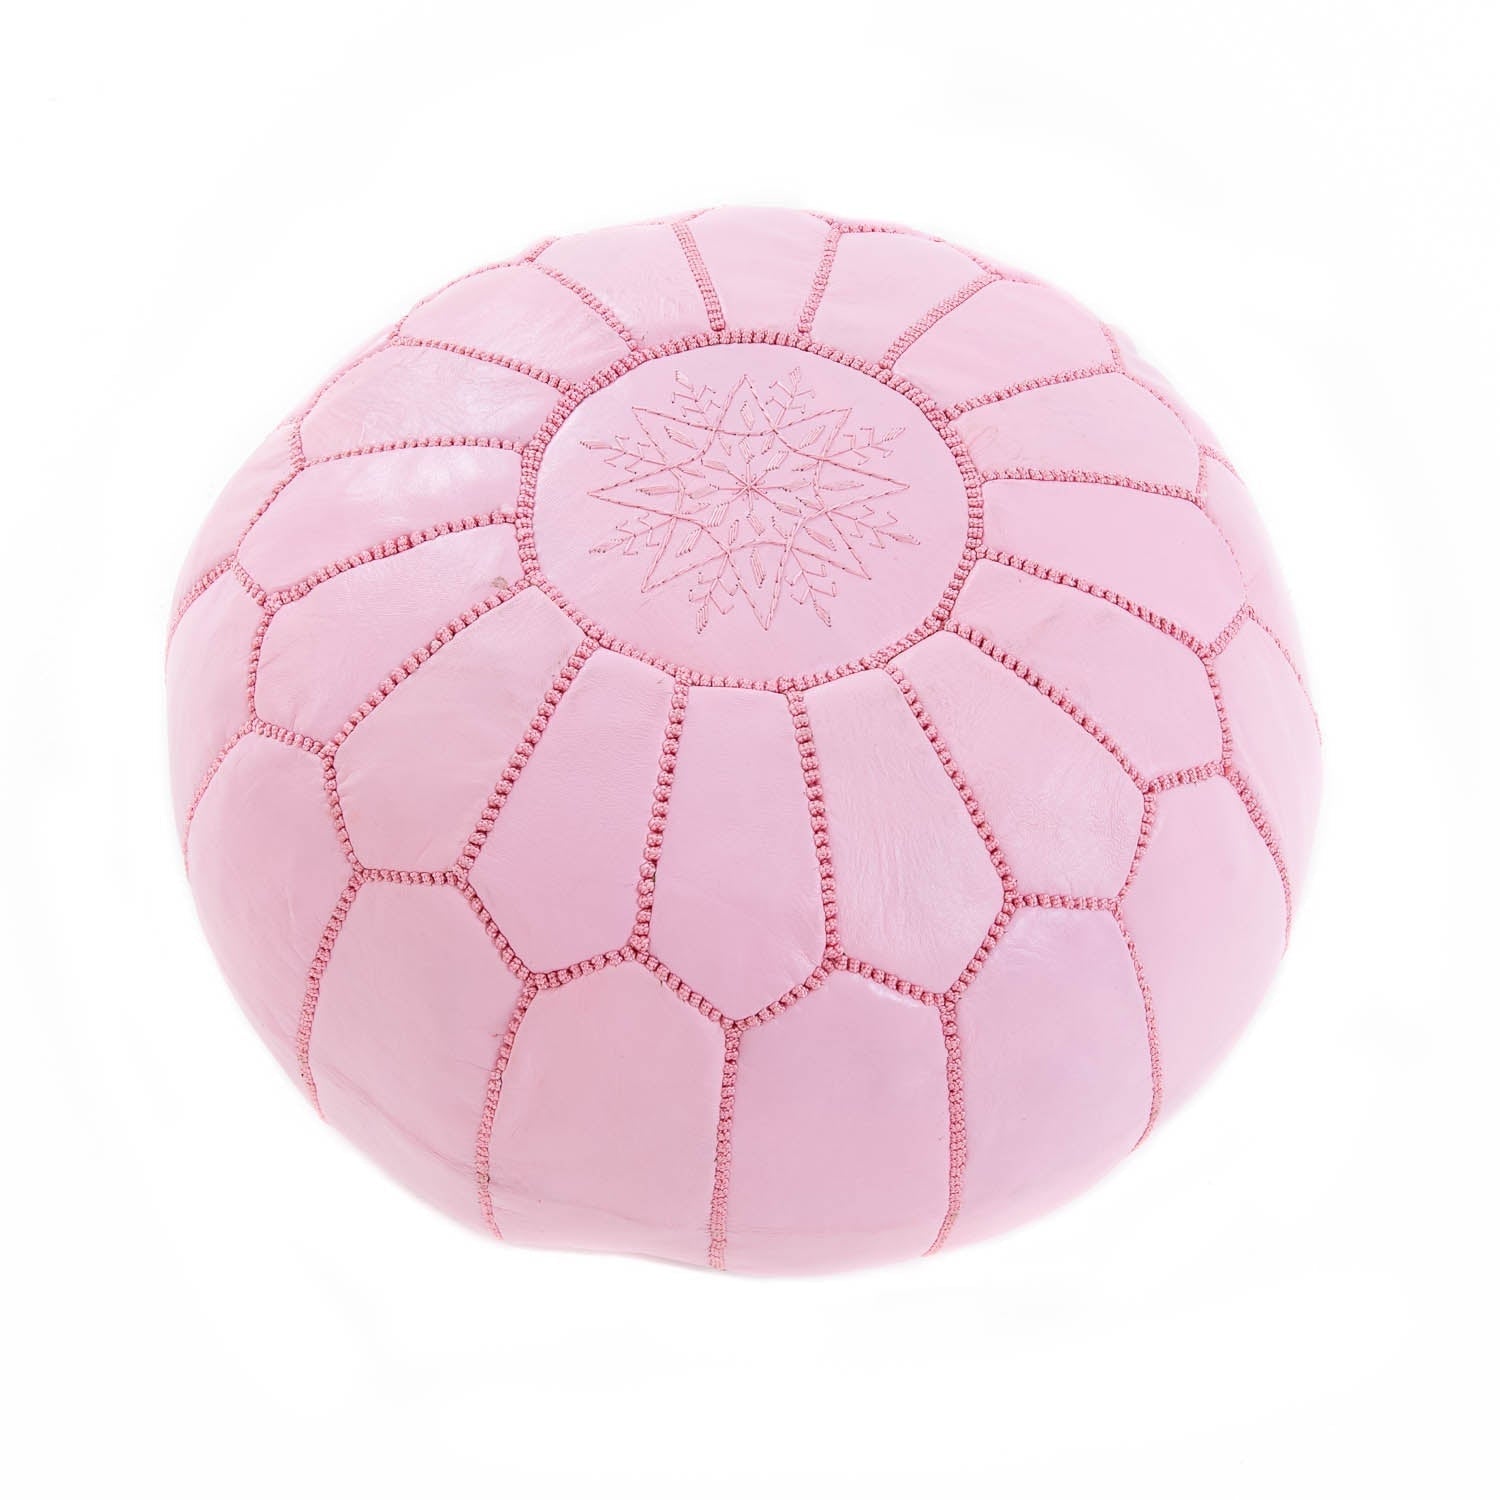 Authentic Moroccan Leather Pouf - Pink - Benisouk